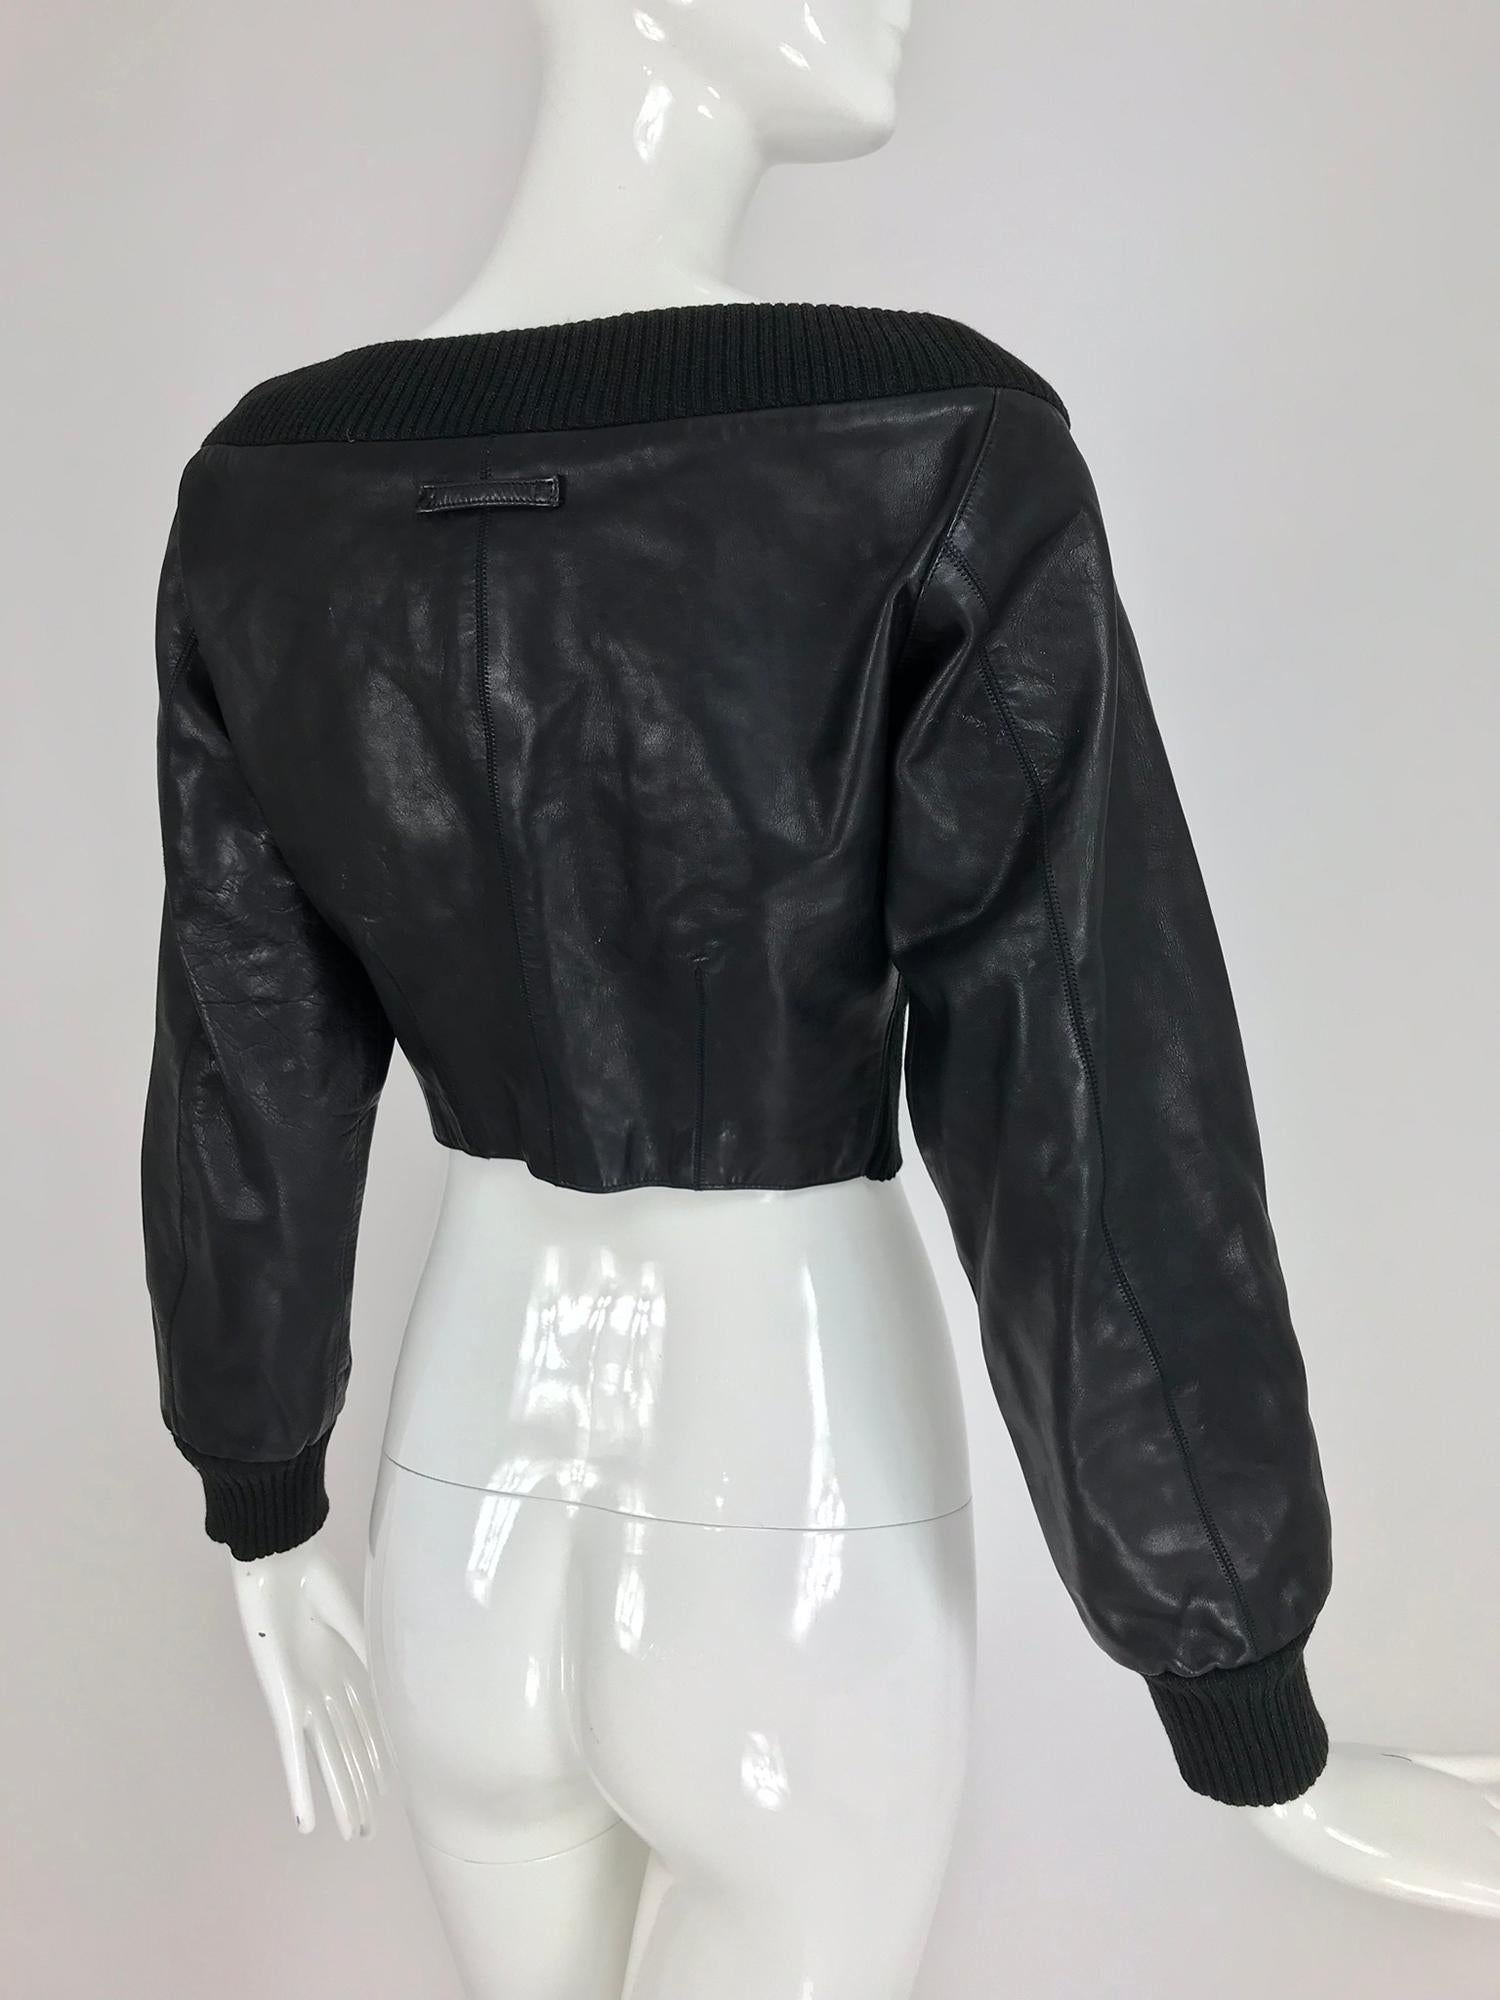 Women's Jean Paul Gaultier black leather and Knit Off the Shoulder Jacket 1990s